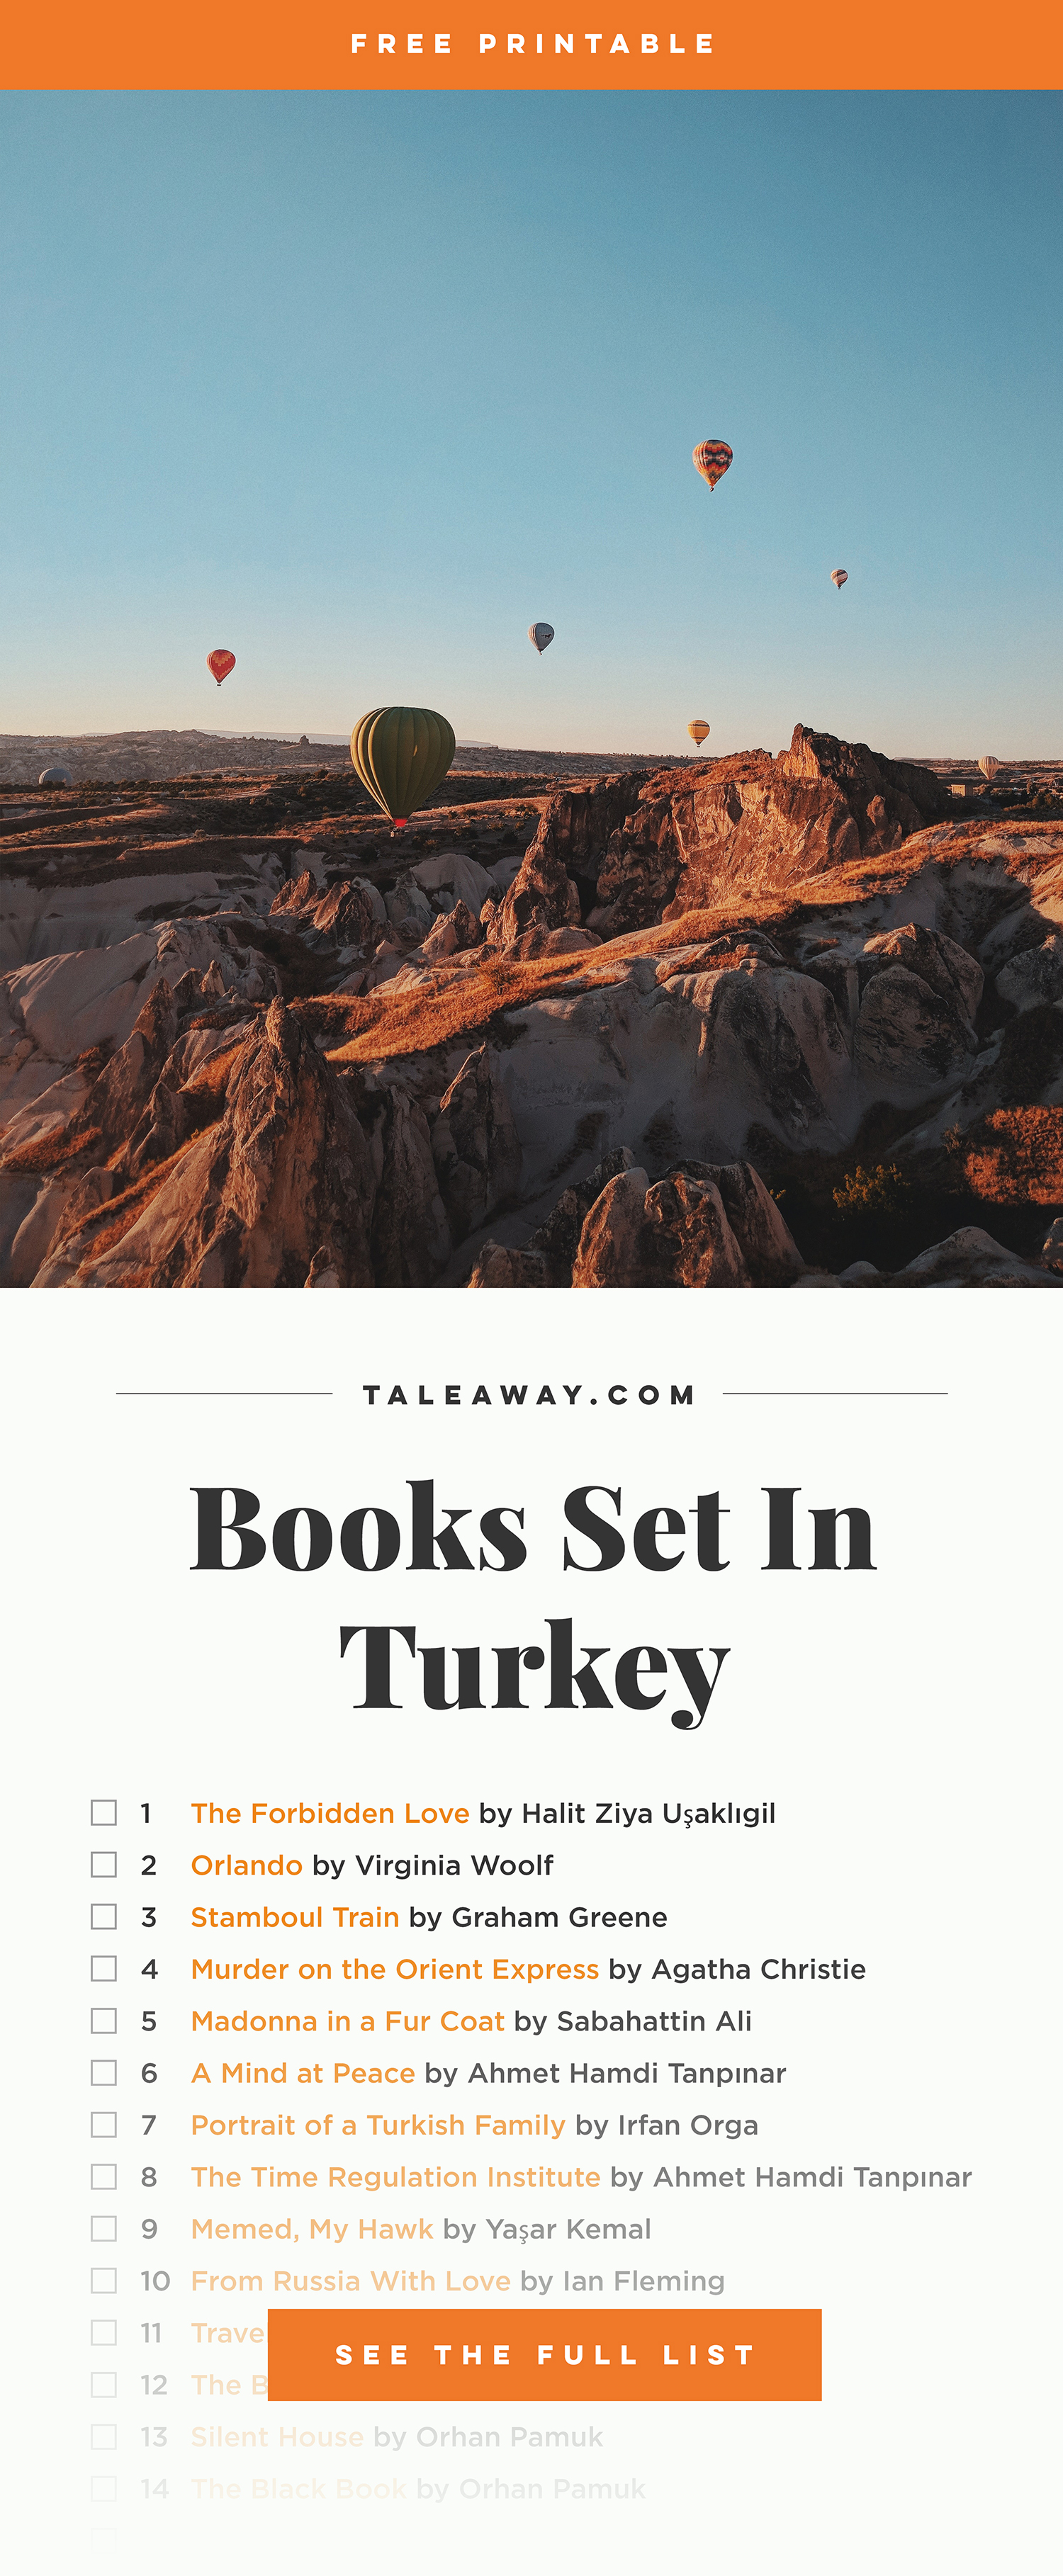 Books Set in Turkey - For more books that inspire travel visit www.taleaway.com - turkish books, turkish novels, turkish book cover, turkish authors, turkey books, istanbul book, turkey inspiration, books and travel, travel reads, reading list, books to read, books set in different countries, turkish books in english, turkey reading list, turkey reading challenge